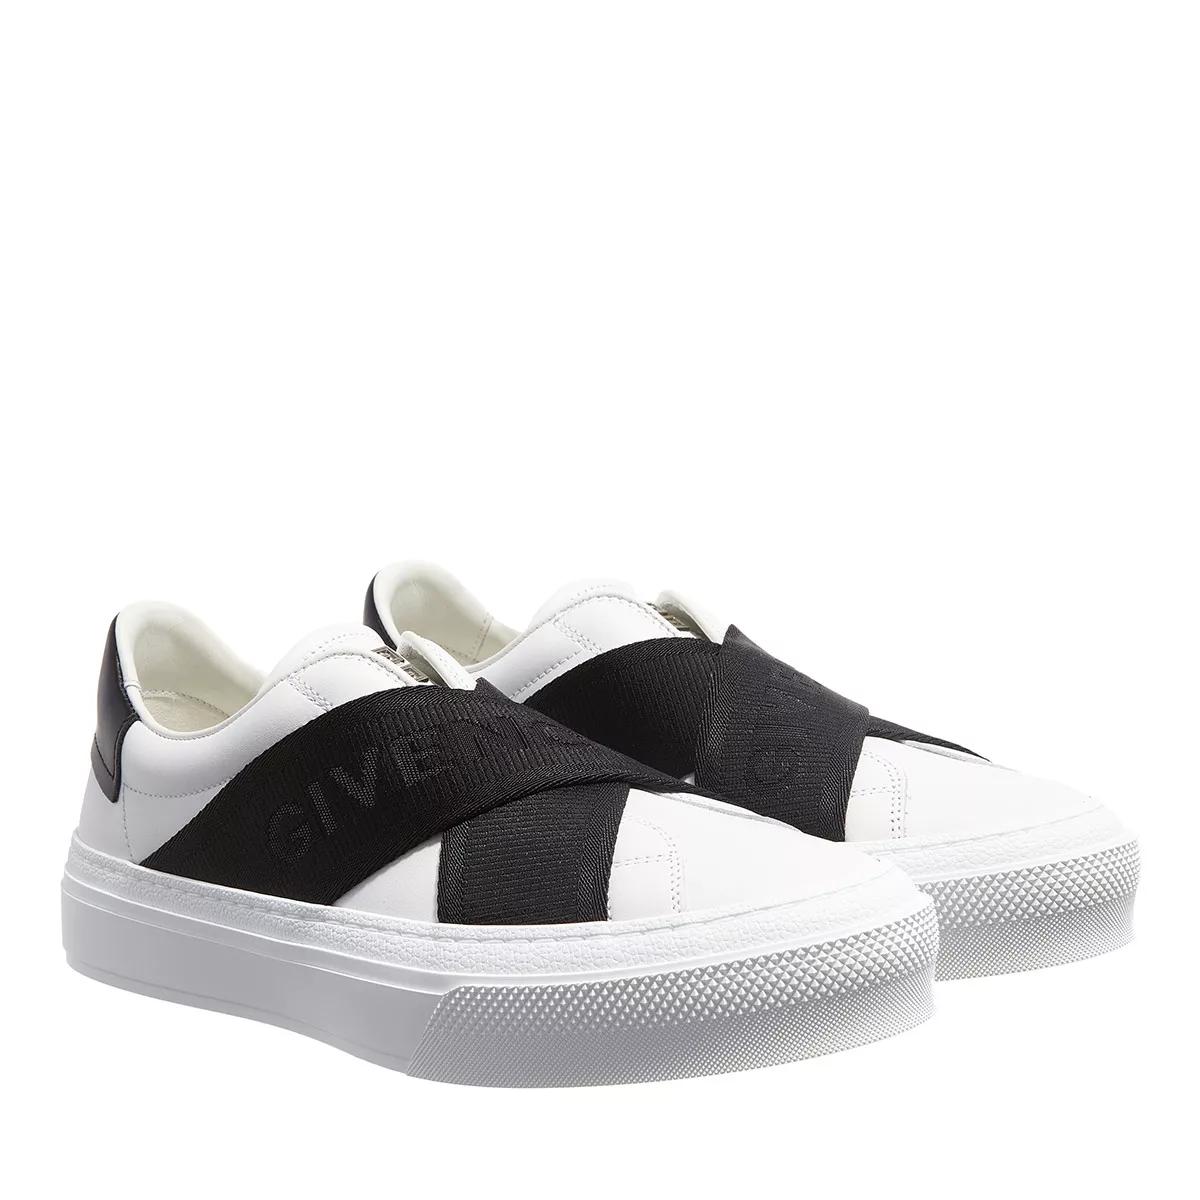 Givenchy Sneakers - City Sport Sneakers With Doulble Webbing Strap - Gr. 36 (EU) - in Schwarz - für Damen von Givenchy